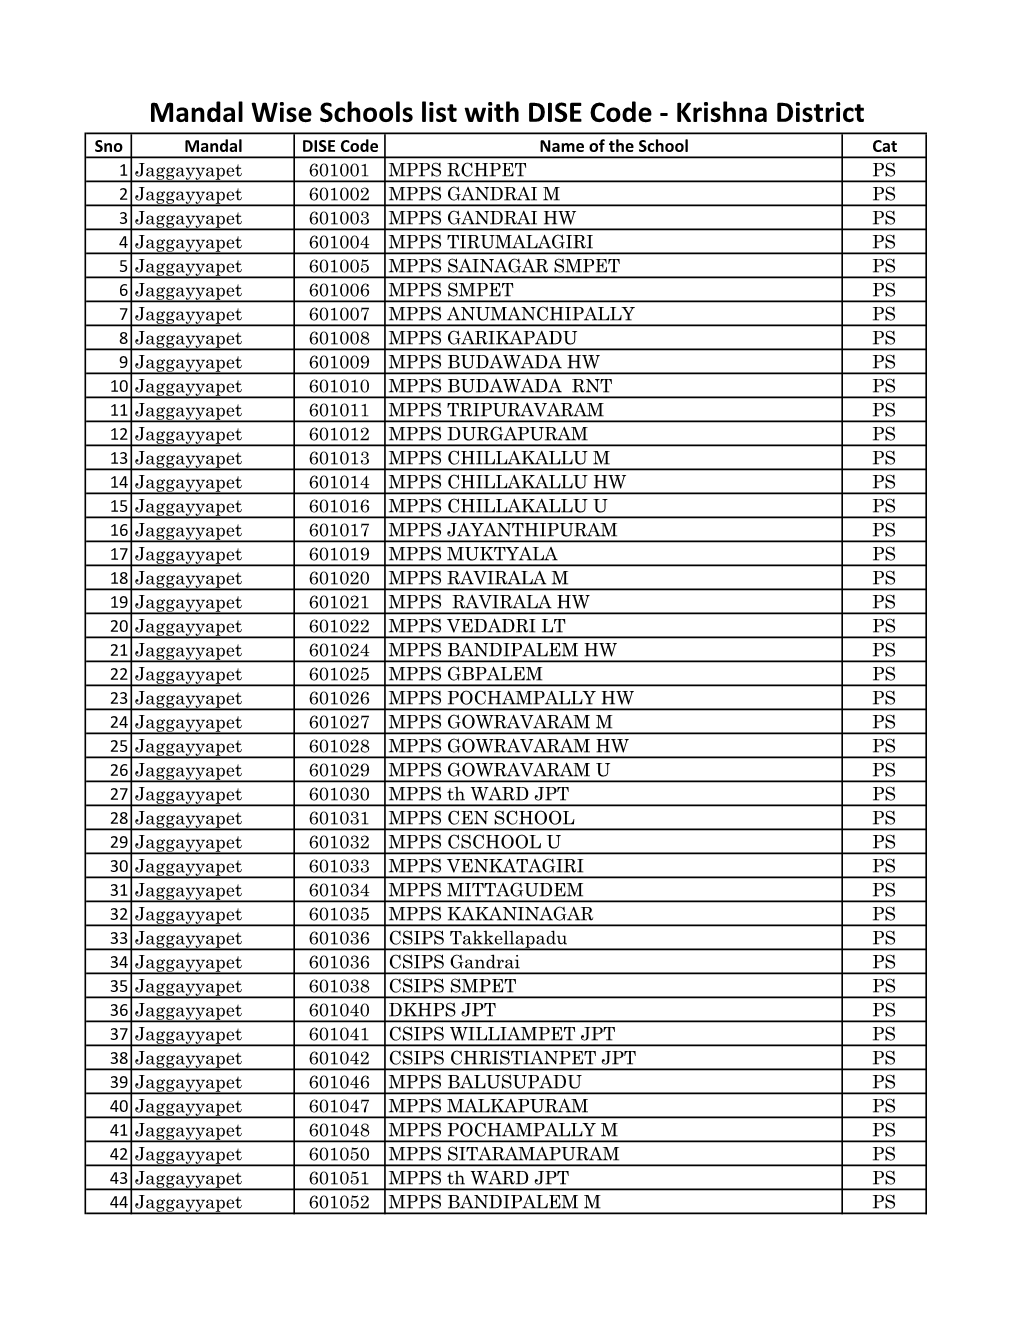 Mandal Wise Schools List with DISE Codes.Pdf